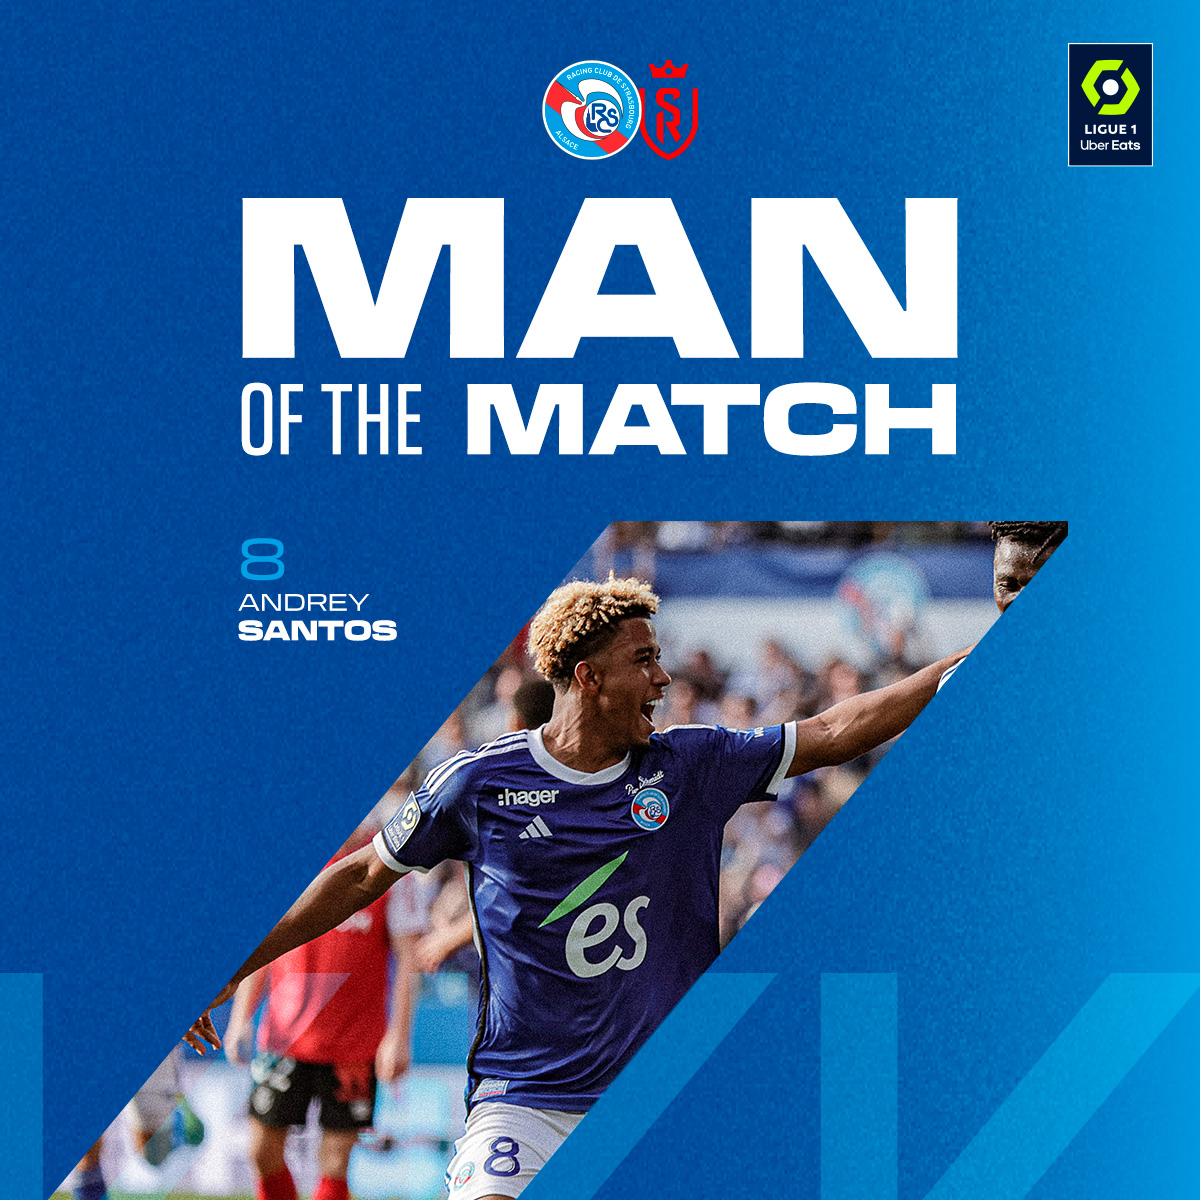 👏 Well done @04Andrey 👏

Andrey Santos was named Man of the Match for #RCSASDR